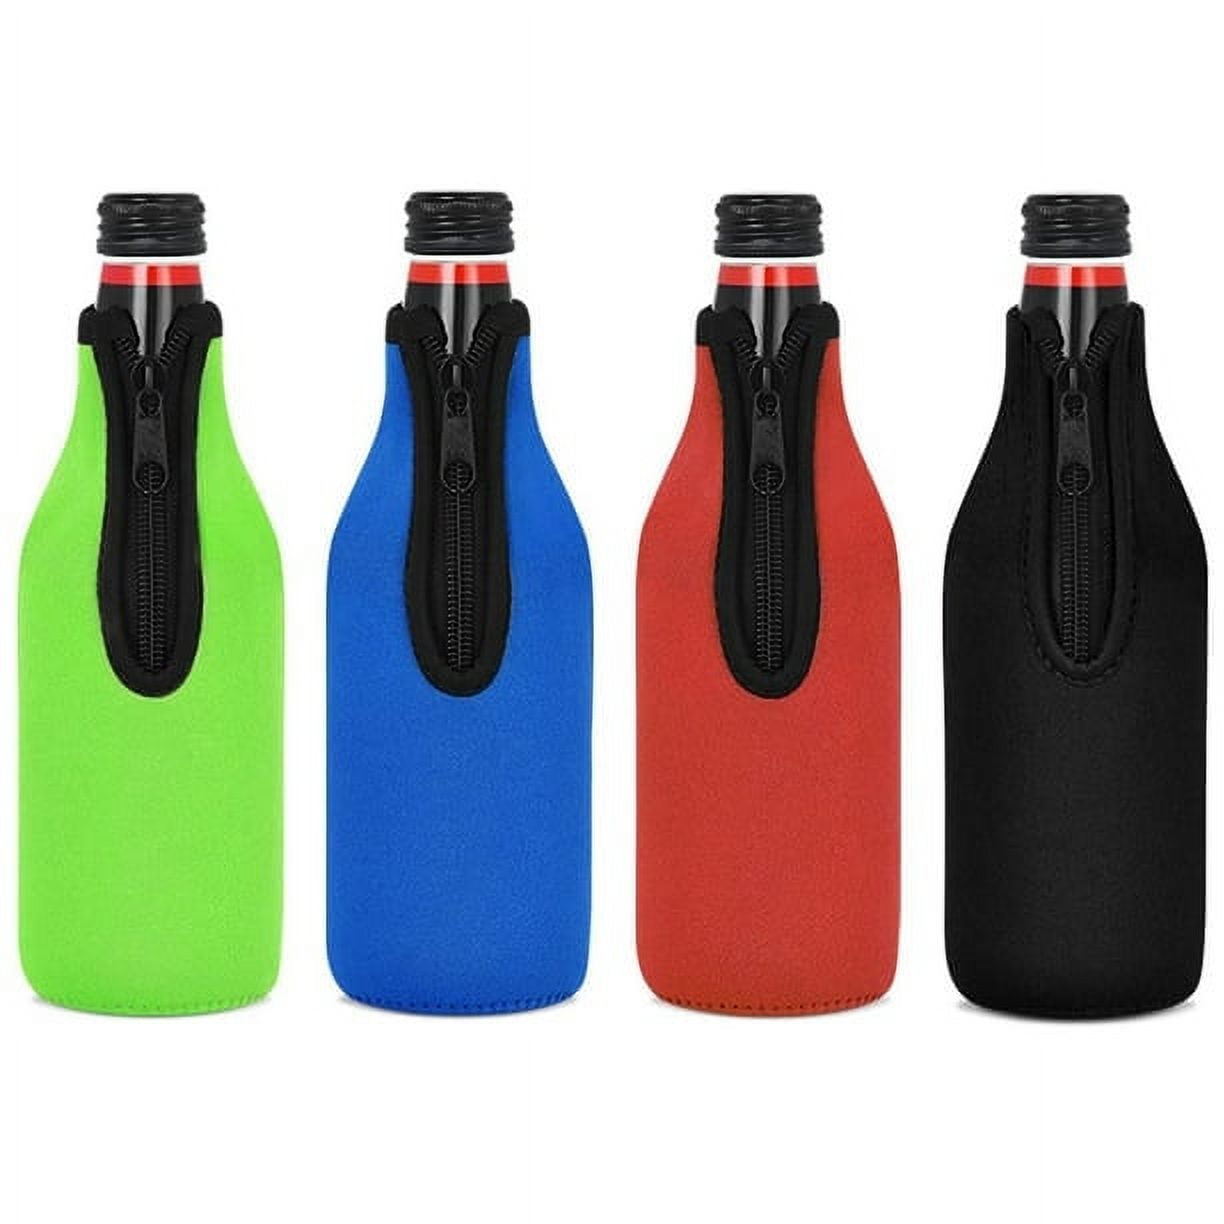  Icy Bev 4 in 1 Can or Bottle Insulator, Sleeves to Keep Beer,  Soda, Seltzer or More Ice Cold For 12 Hours. Insulated Can Cooler,Works  Universally for Glass Bottles and Aluminium